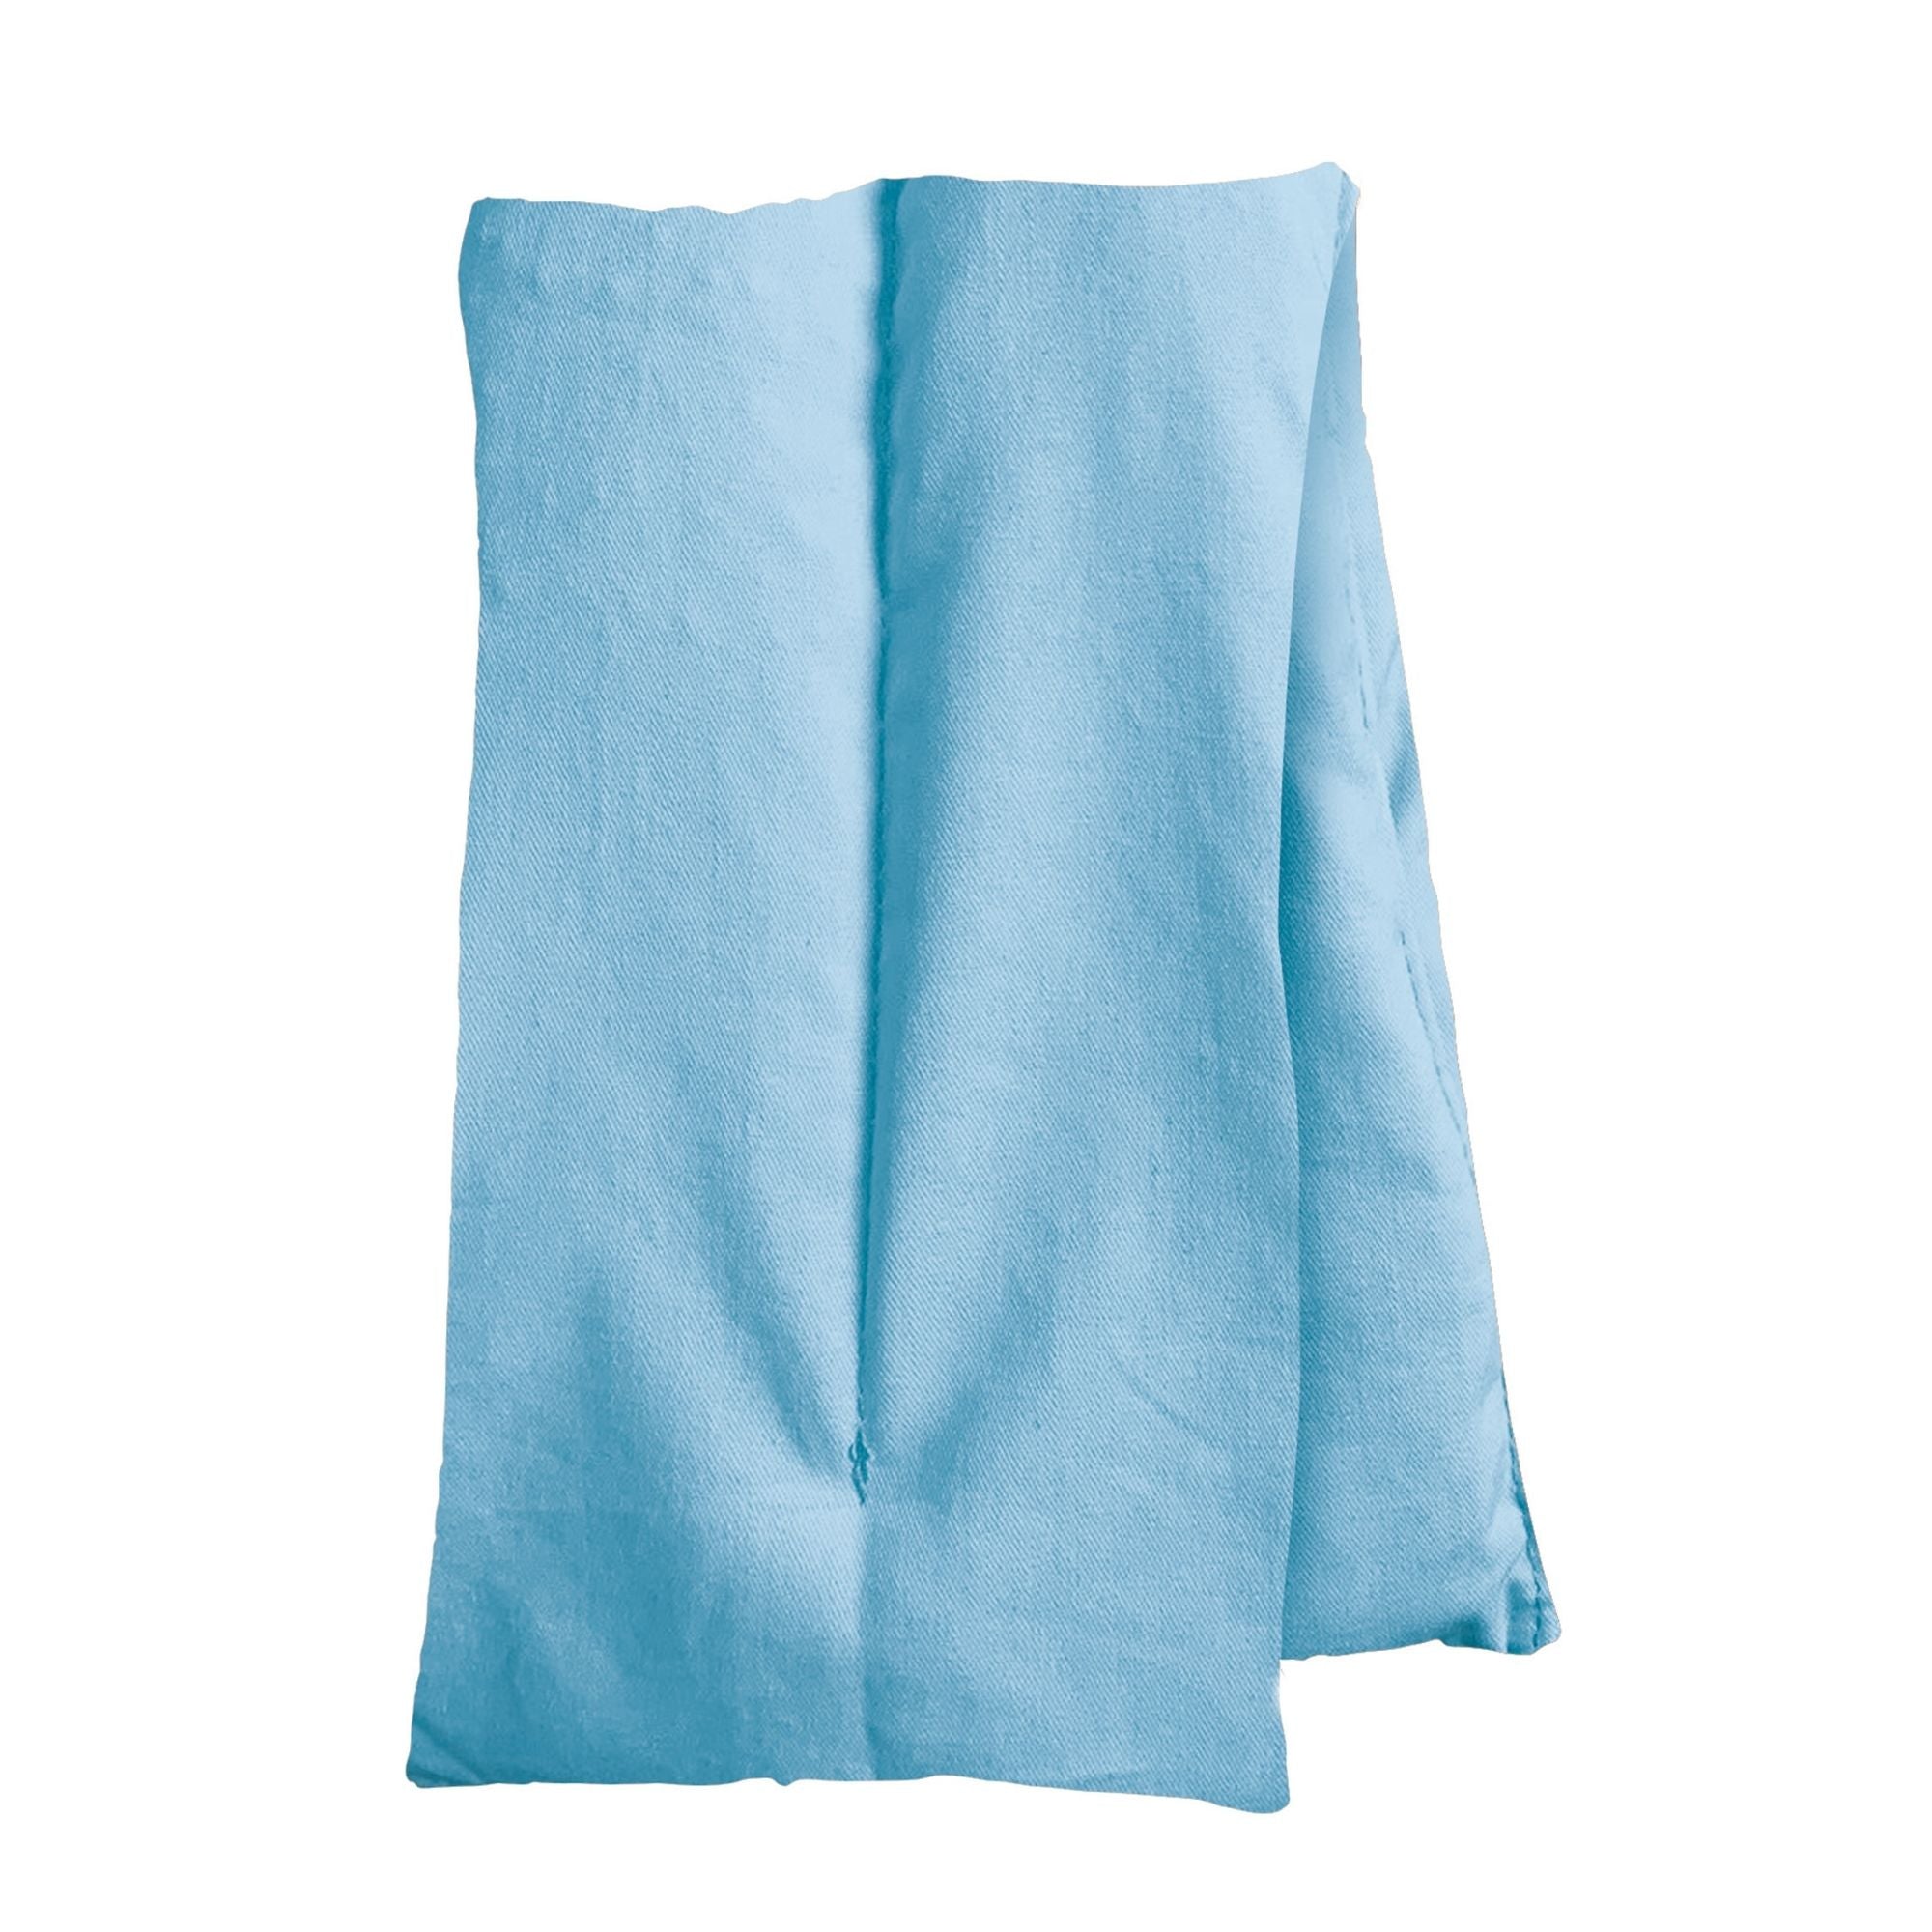 Pastel Blue De-Stress Infused with Chamomile & Jasmine Soothing Microwavable Body Wrap